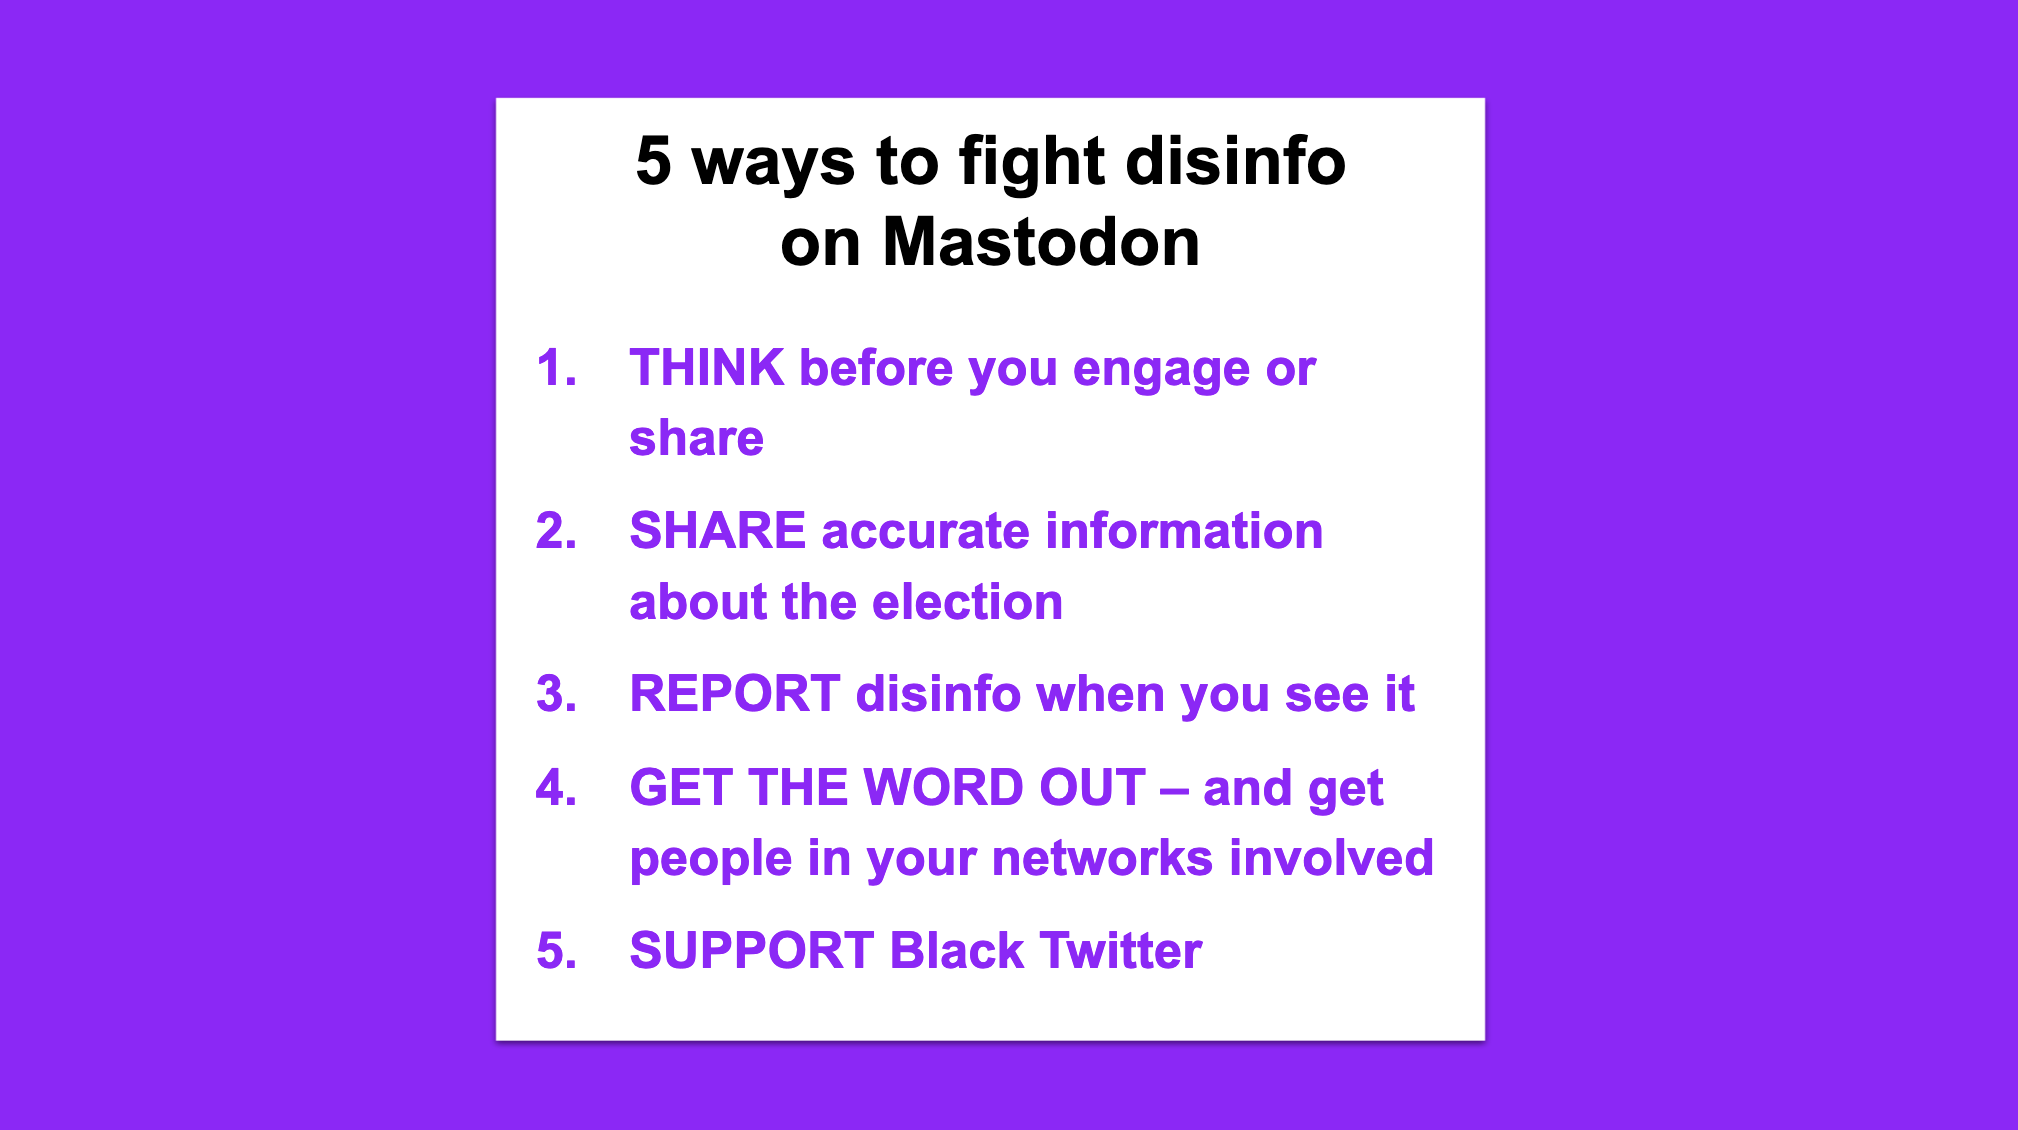 5 ways to fight disinfo on Mastodon, starting with THINK before you engage or share. The full list is in the artcle.